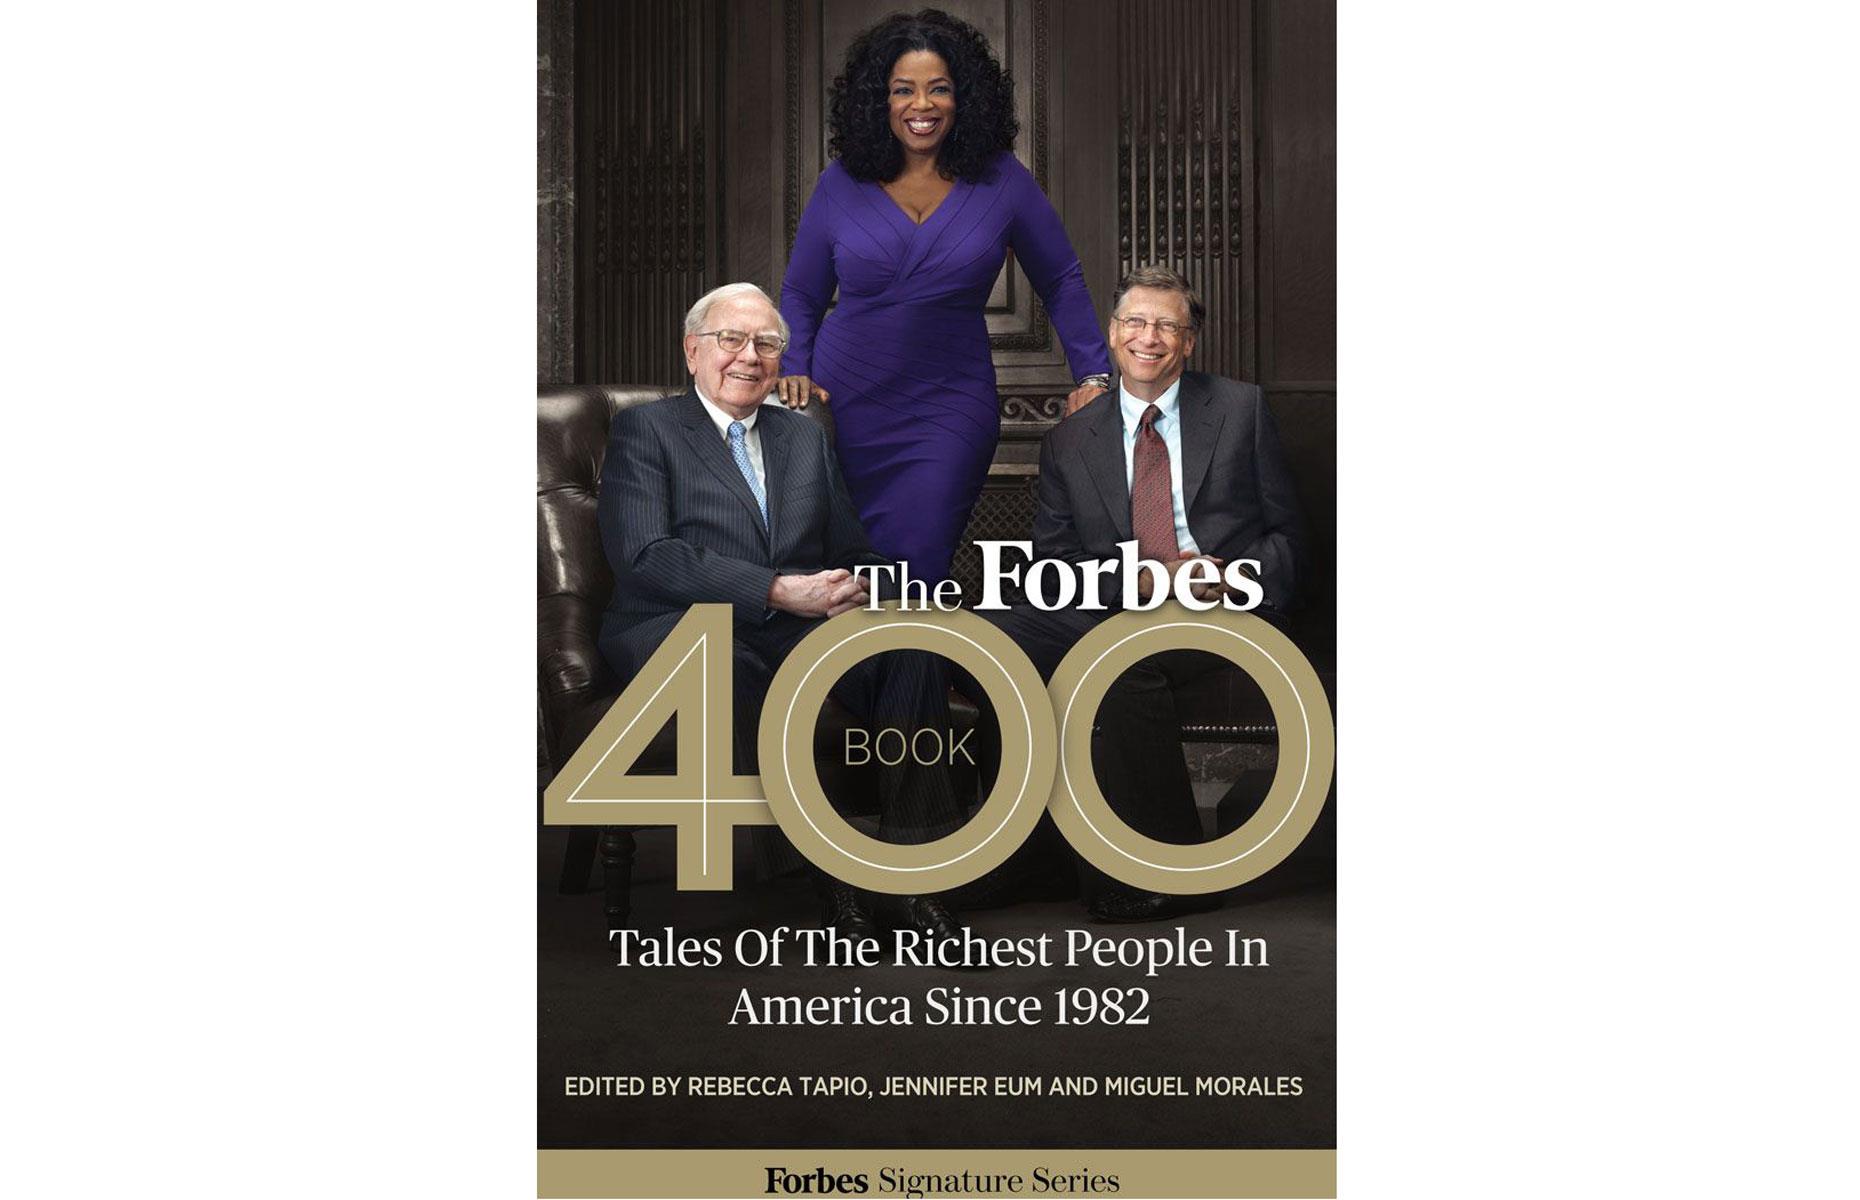 First Forbes 400 appearance 